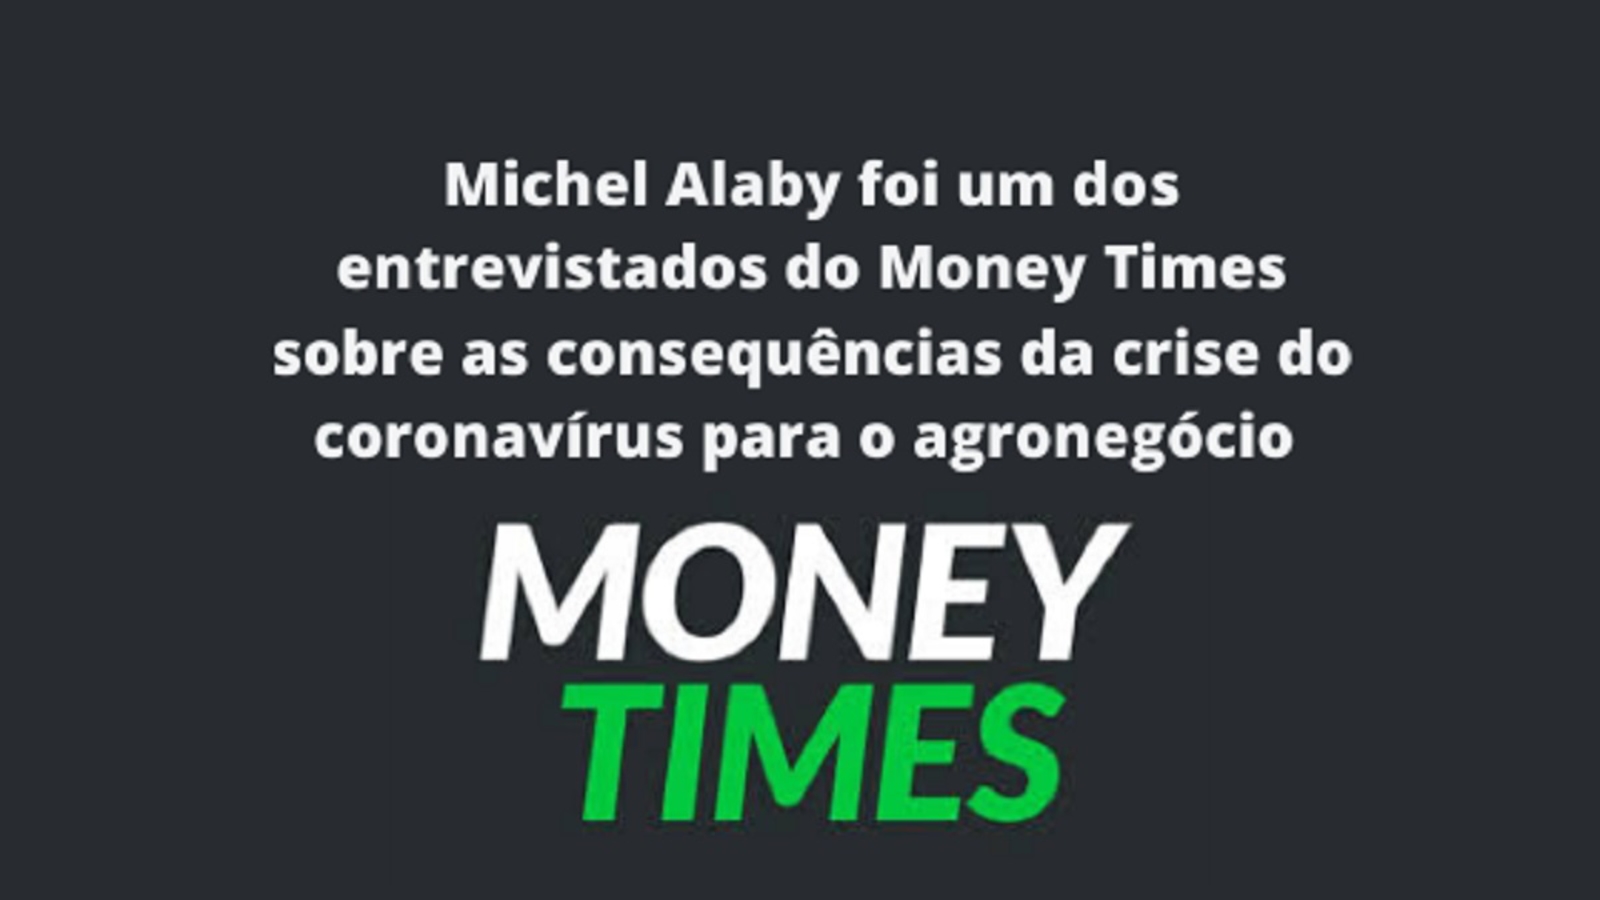 alaby-money-times